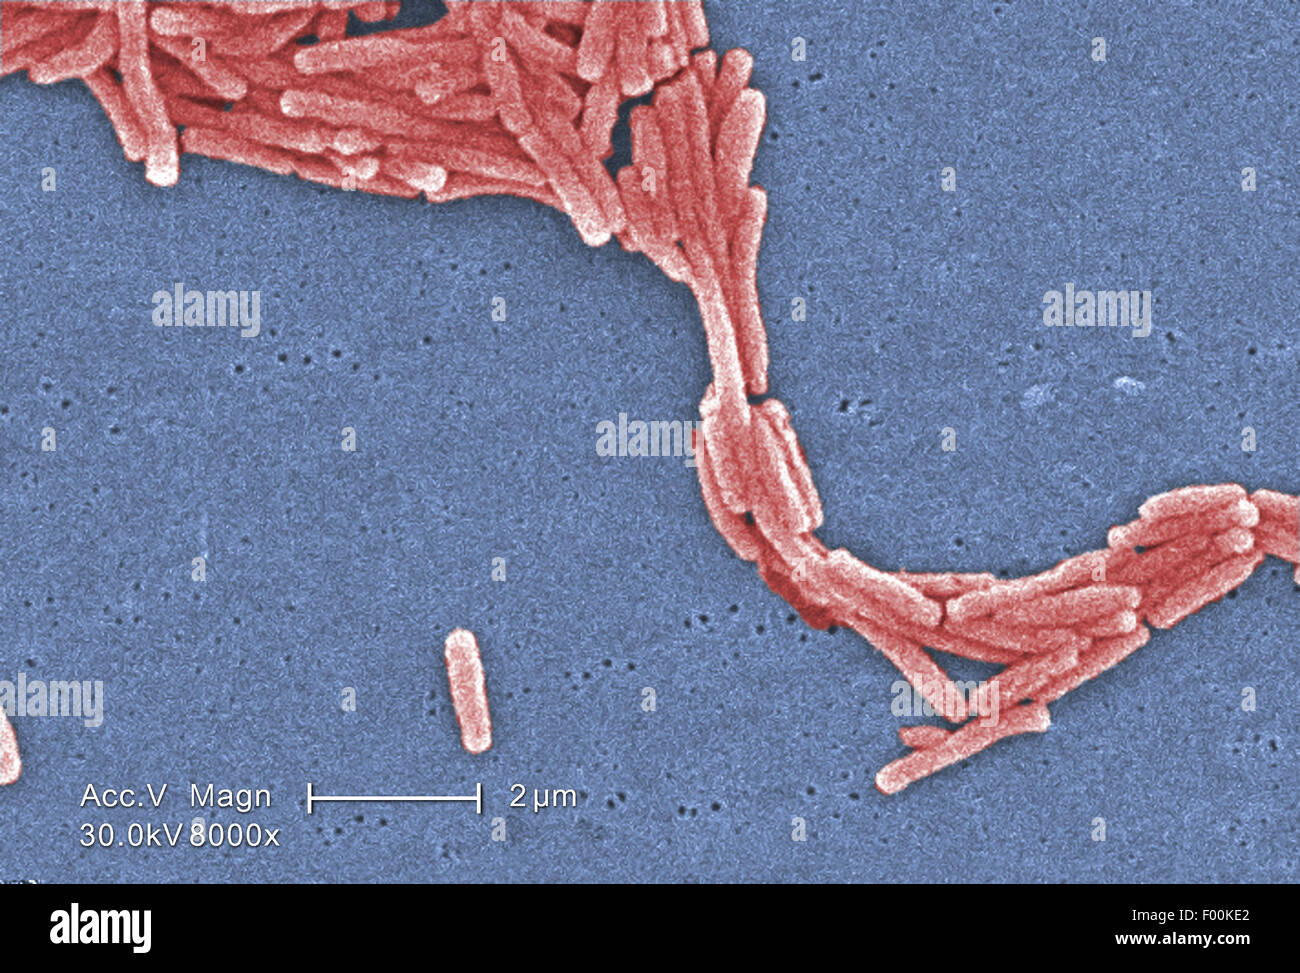 Colorized scanning electron micrograph (SEM) depicted a scattered grouping of Gram-negative Legionella pneumophila  bacteria. Mag 8000X Stock Photo